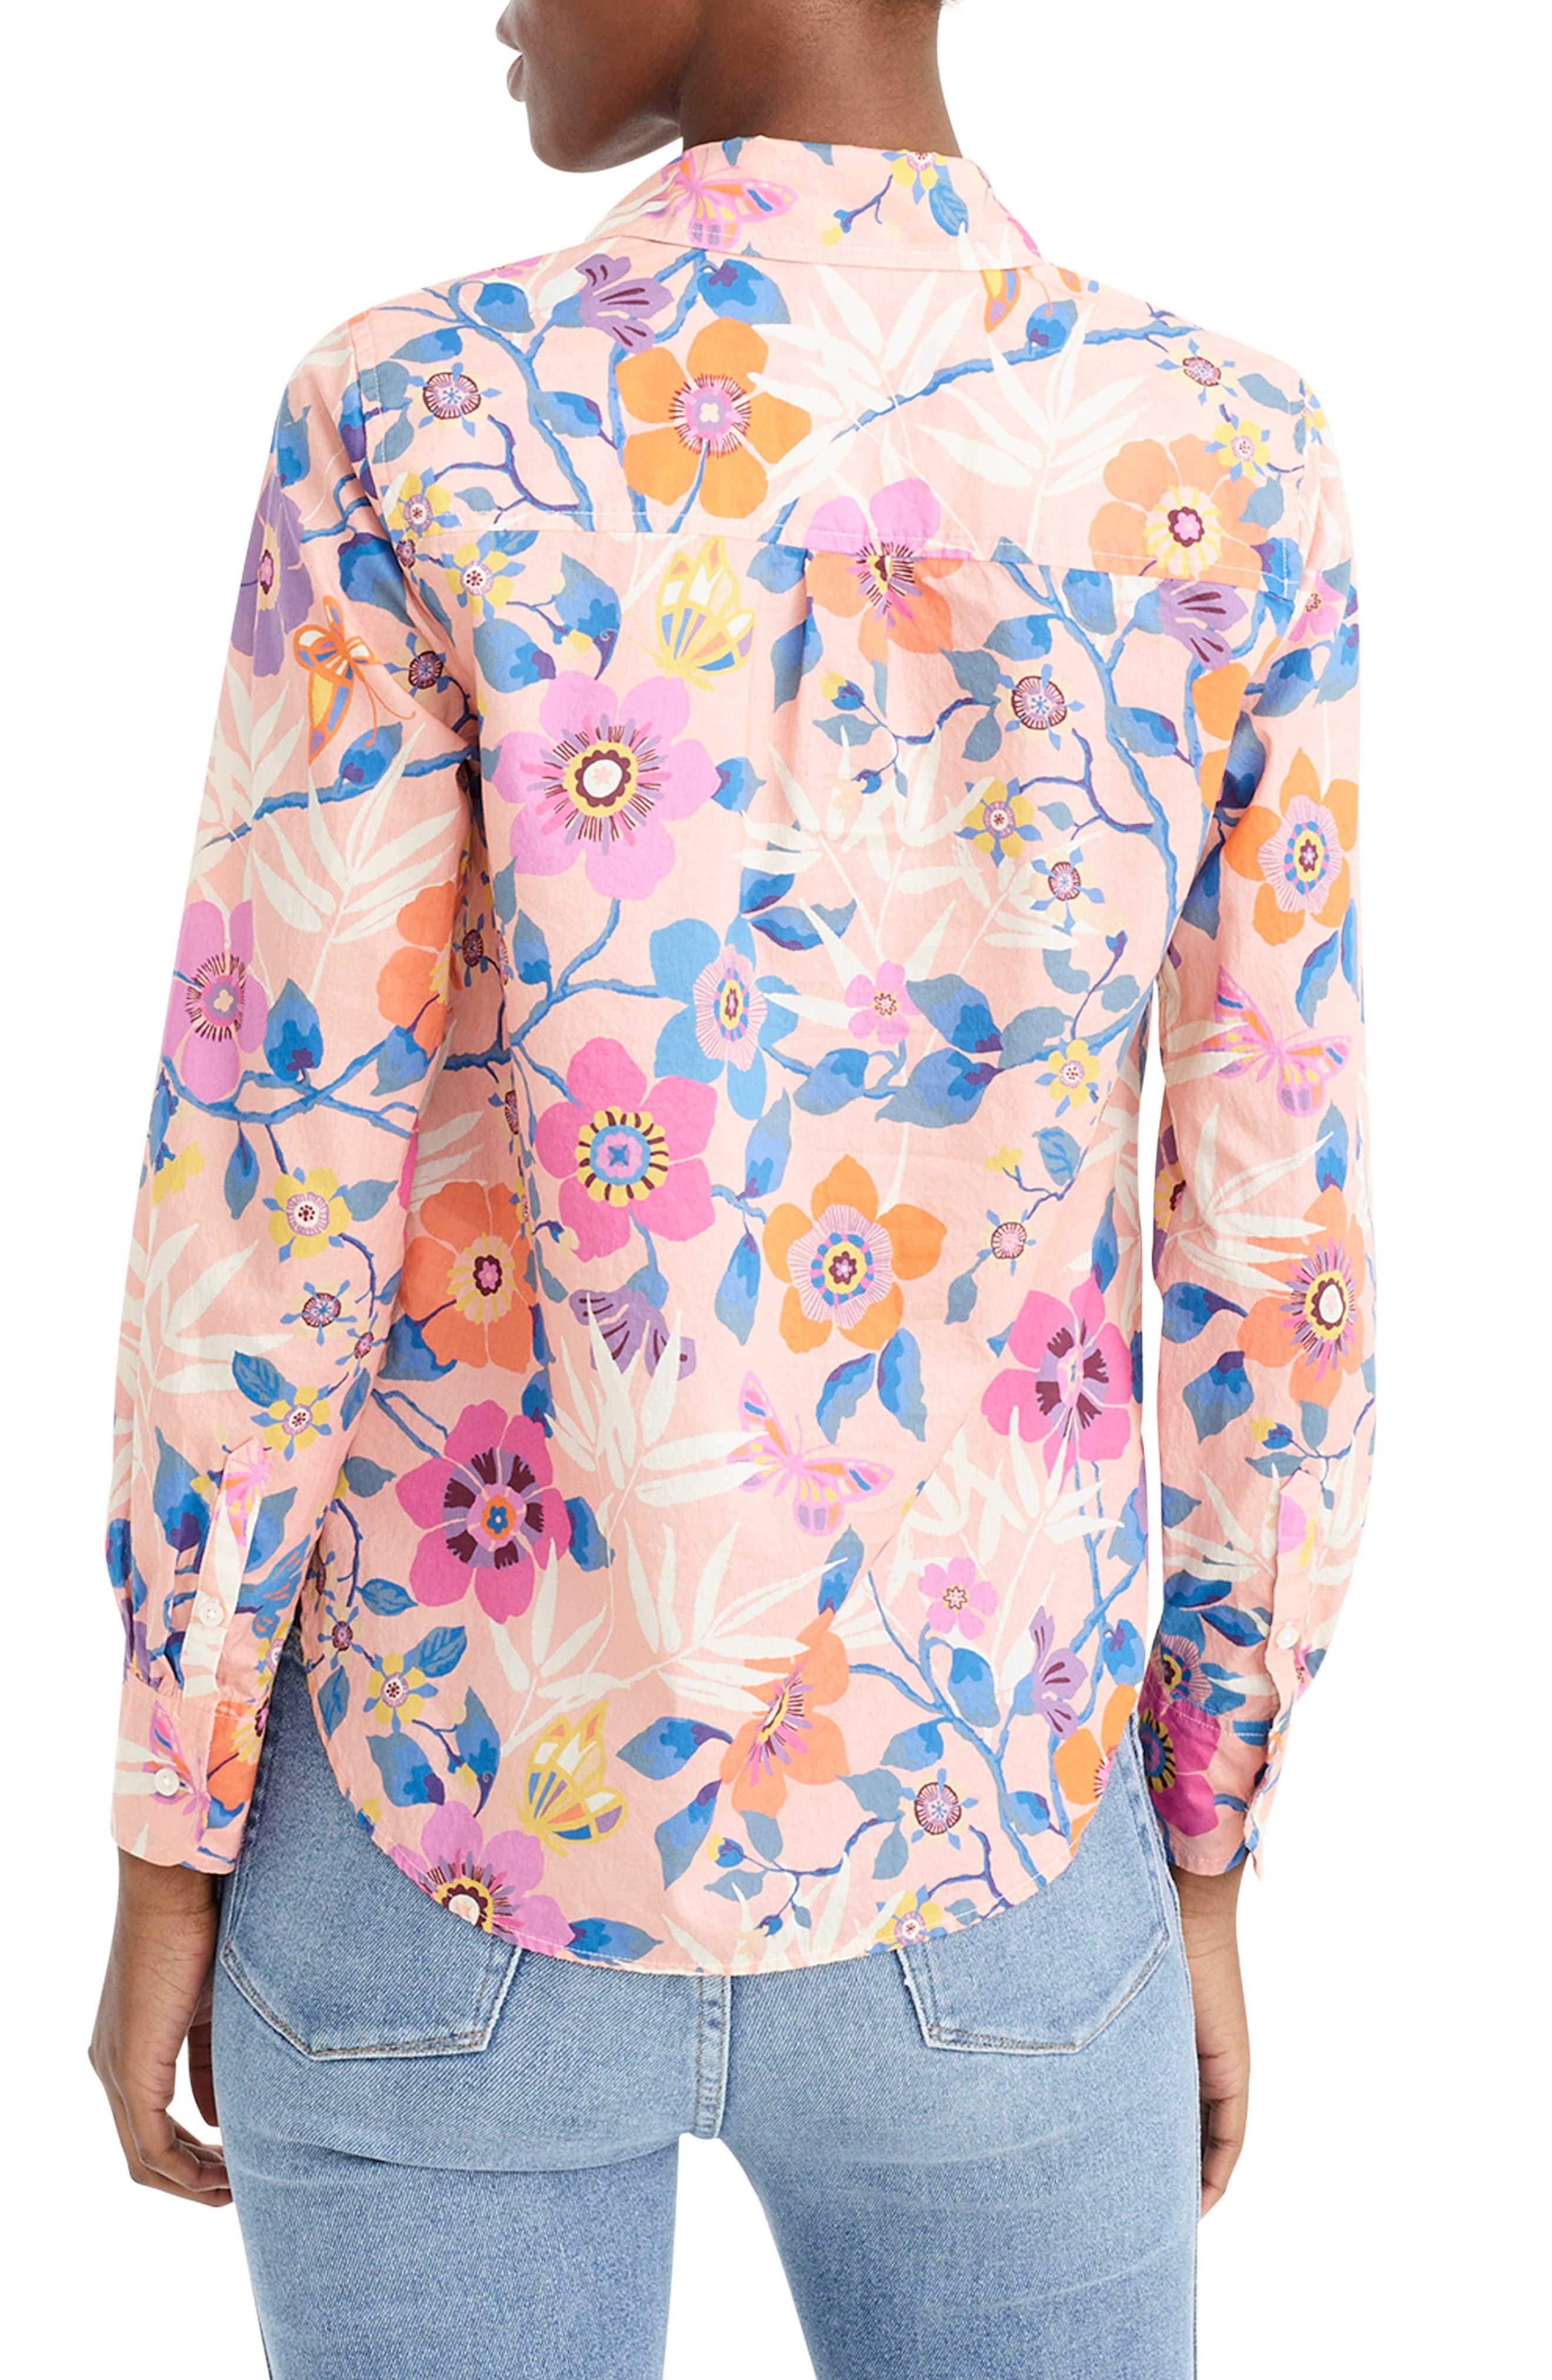 J.Crew Liberty Floral Classic Popover Shirt in Pink - Lyst